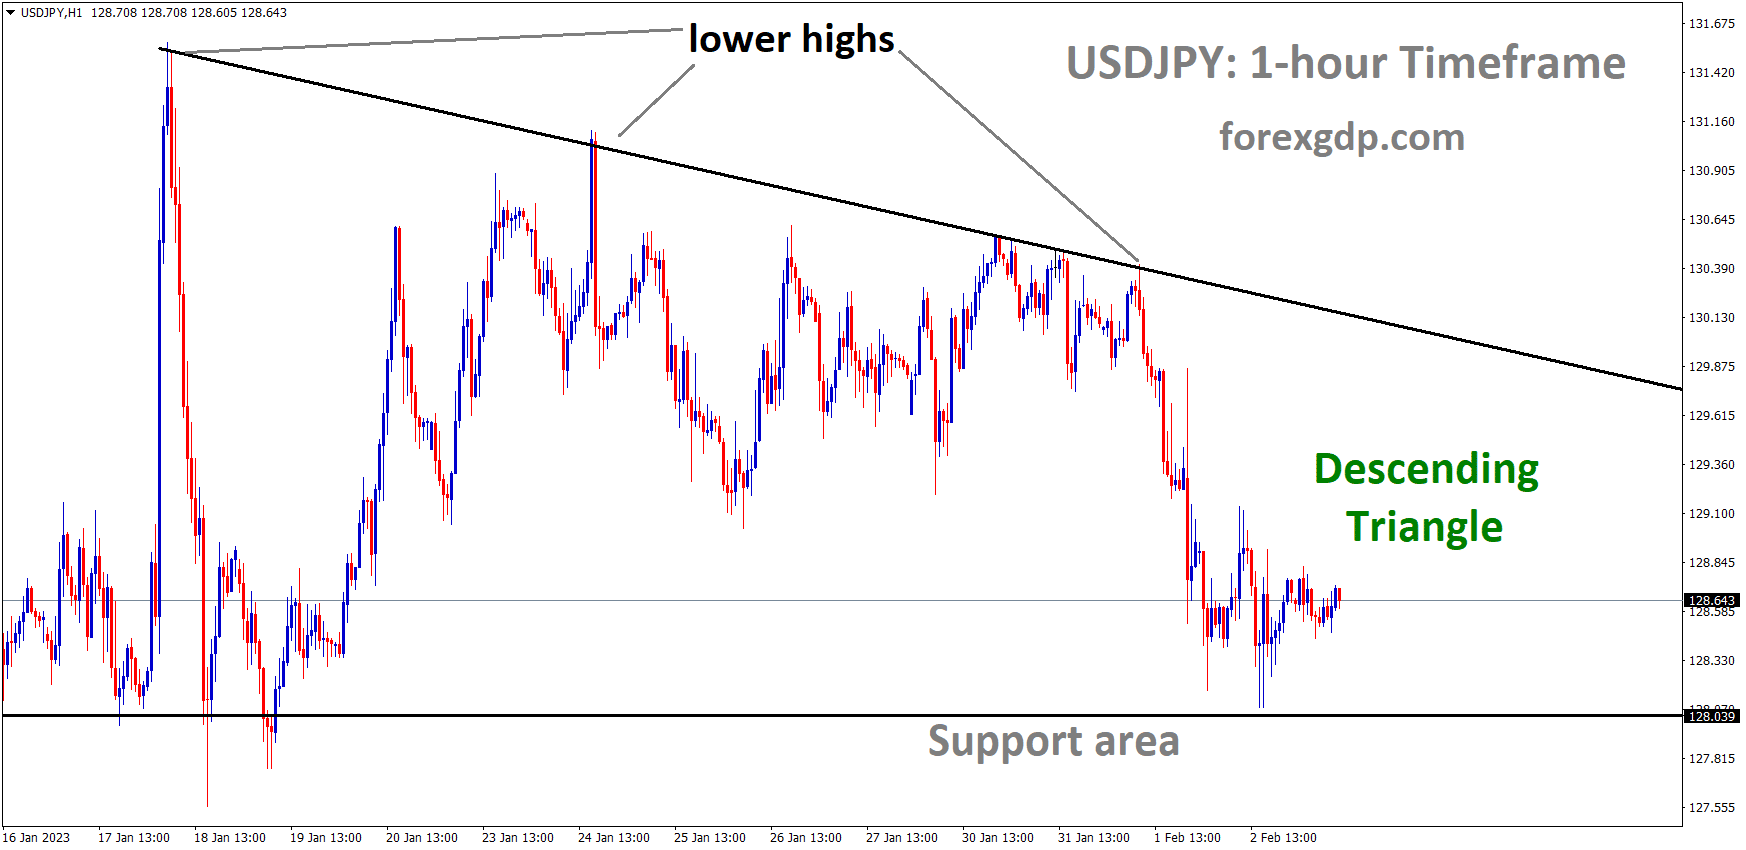 USDJPY is moving in the Descending triangle pattern and the market has rebounded from the horizontal support area of the pattern